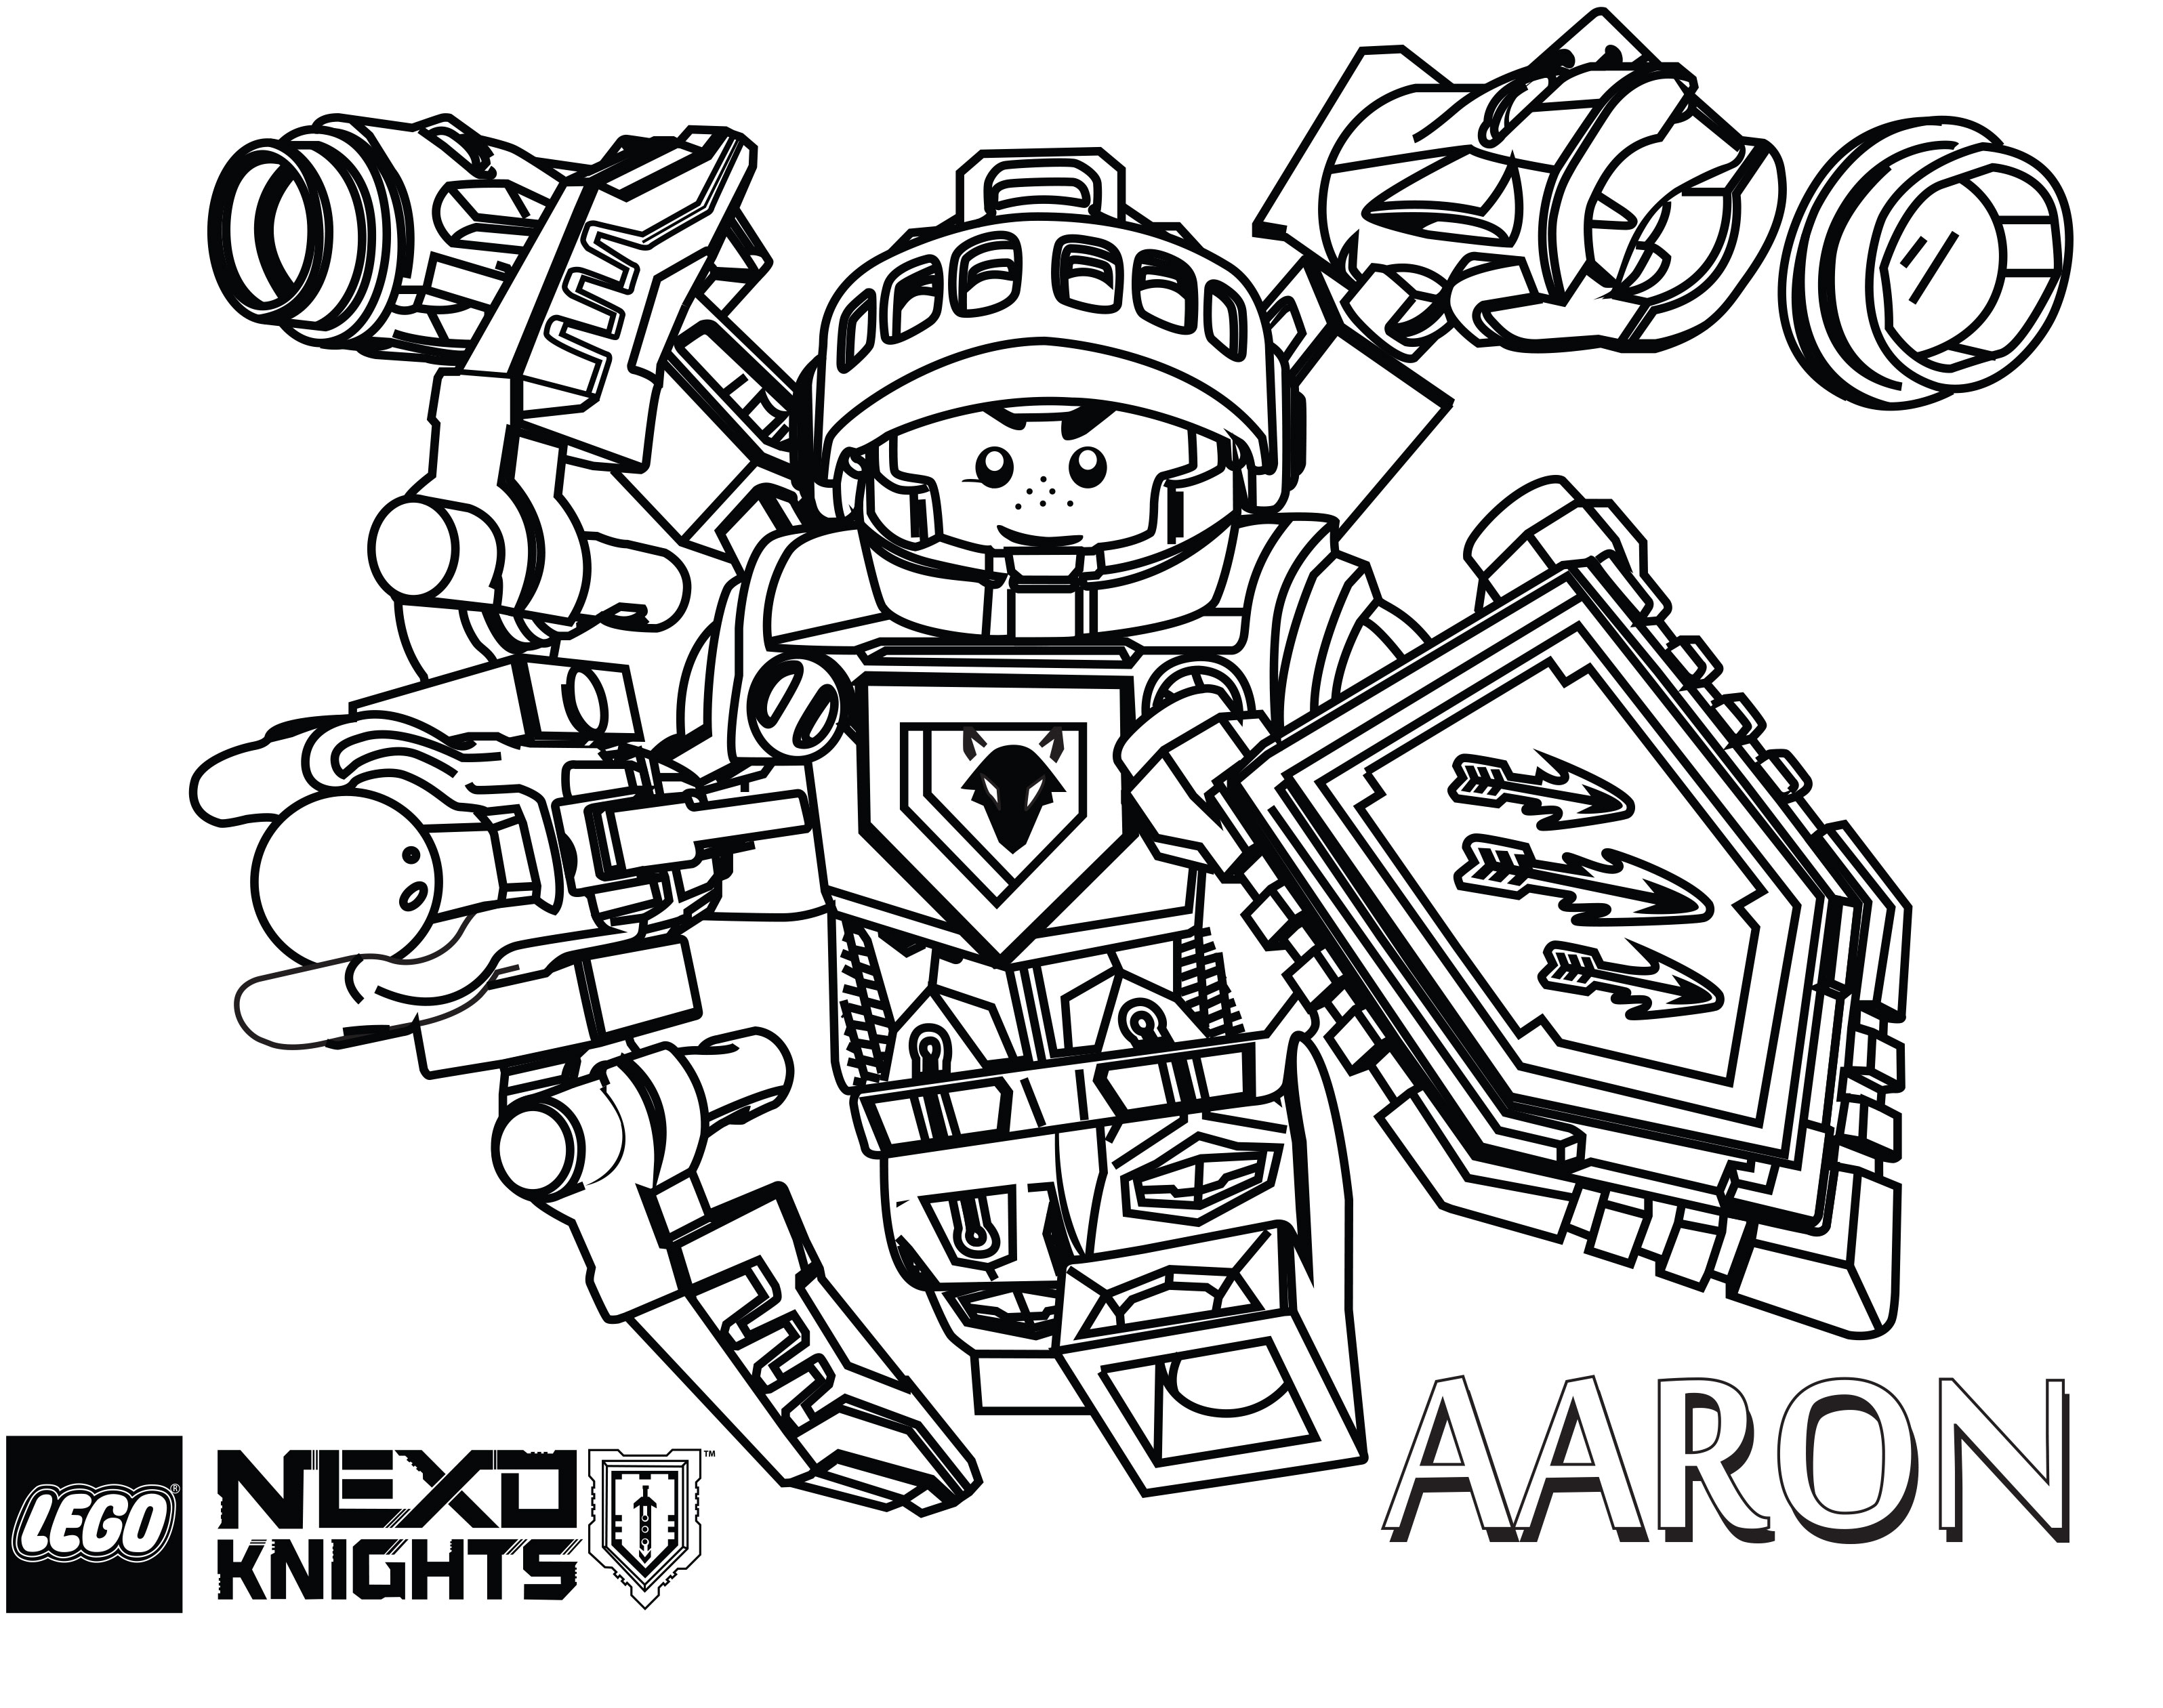 Knights Coloring Pages Lego Nexo Knights Coloring Pages The Brick Fan